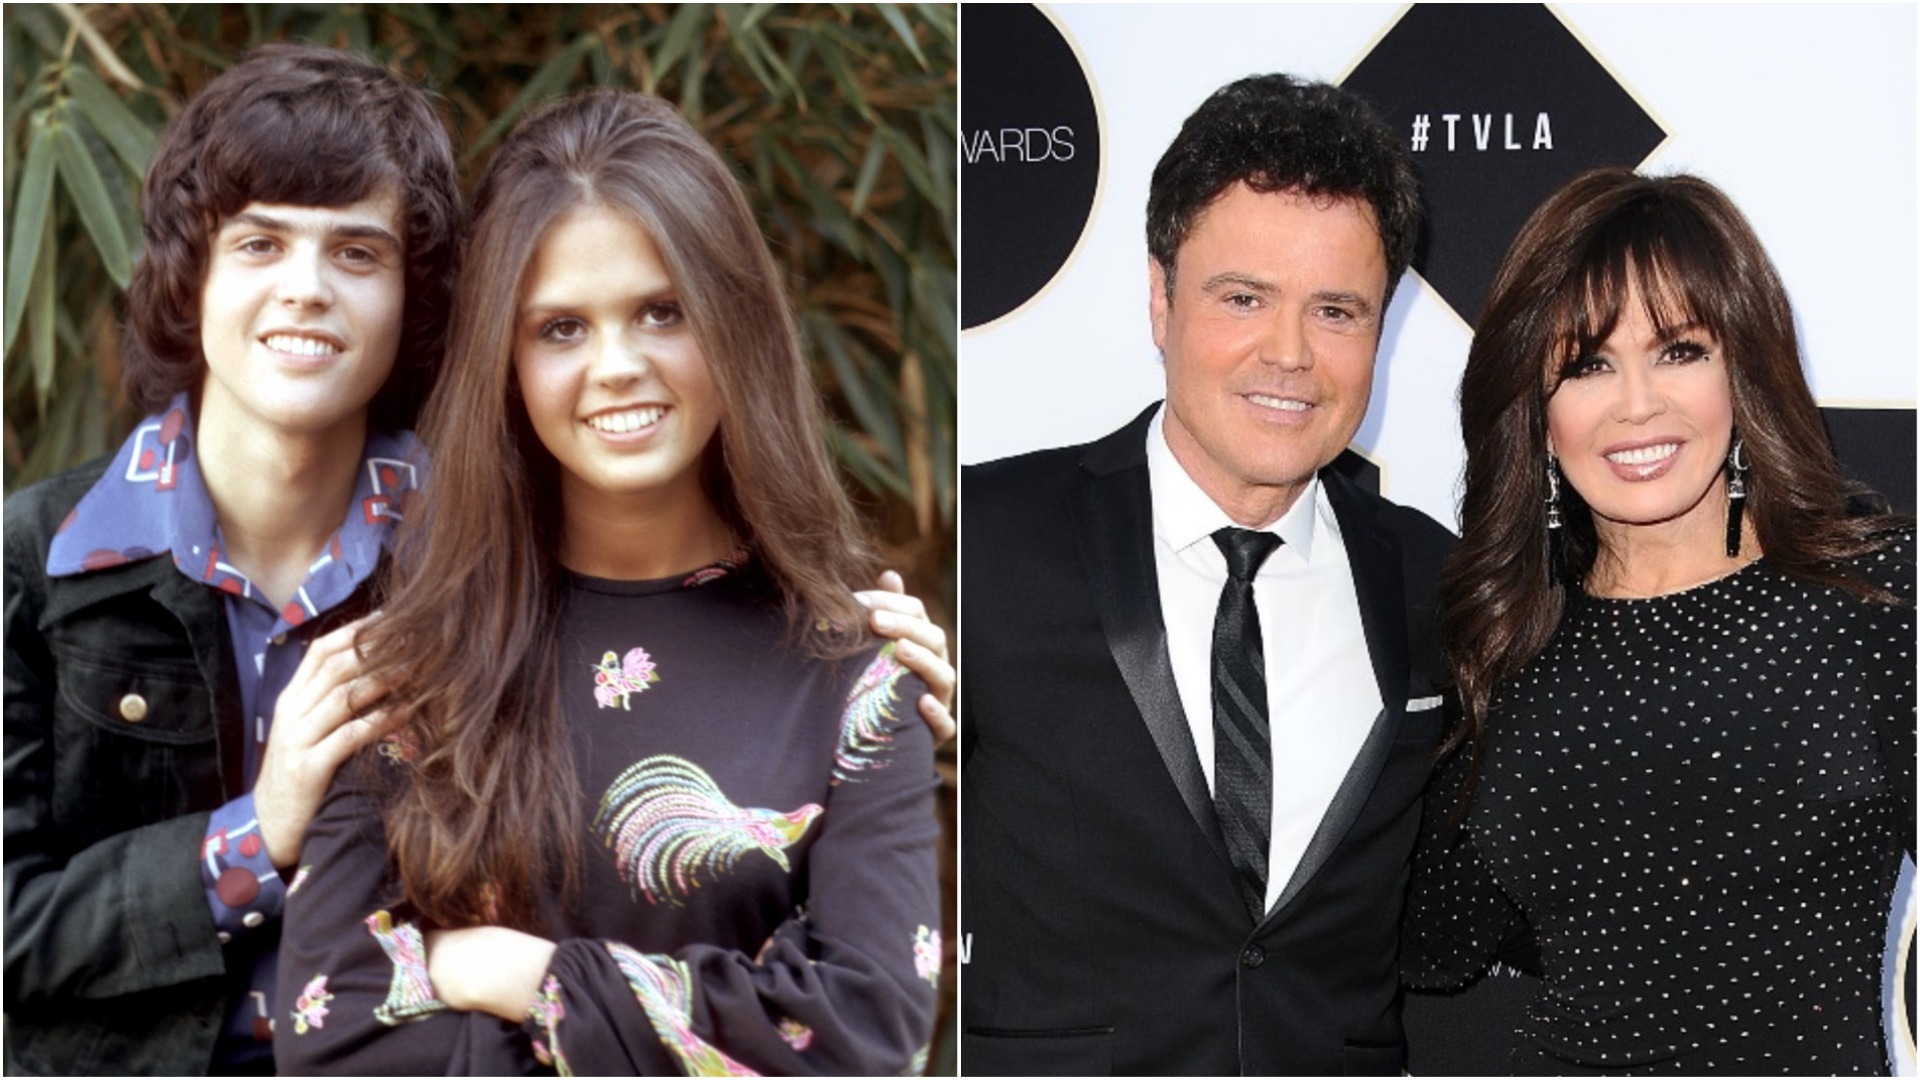 Donny Osmond and Marie Osmond: A Look at Their Career Together